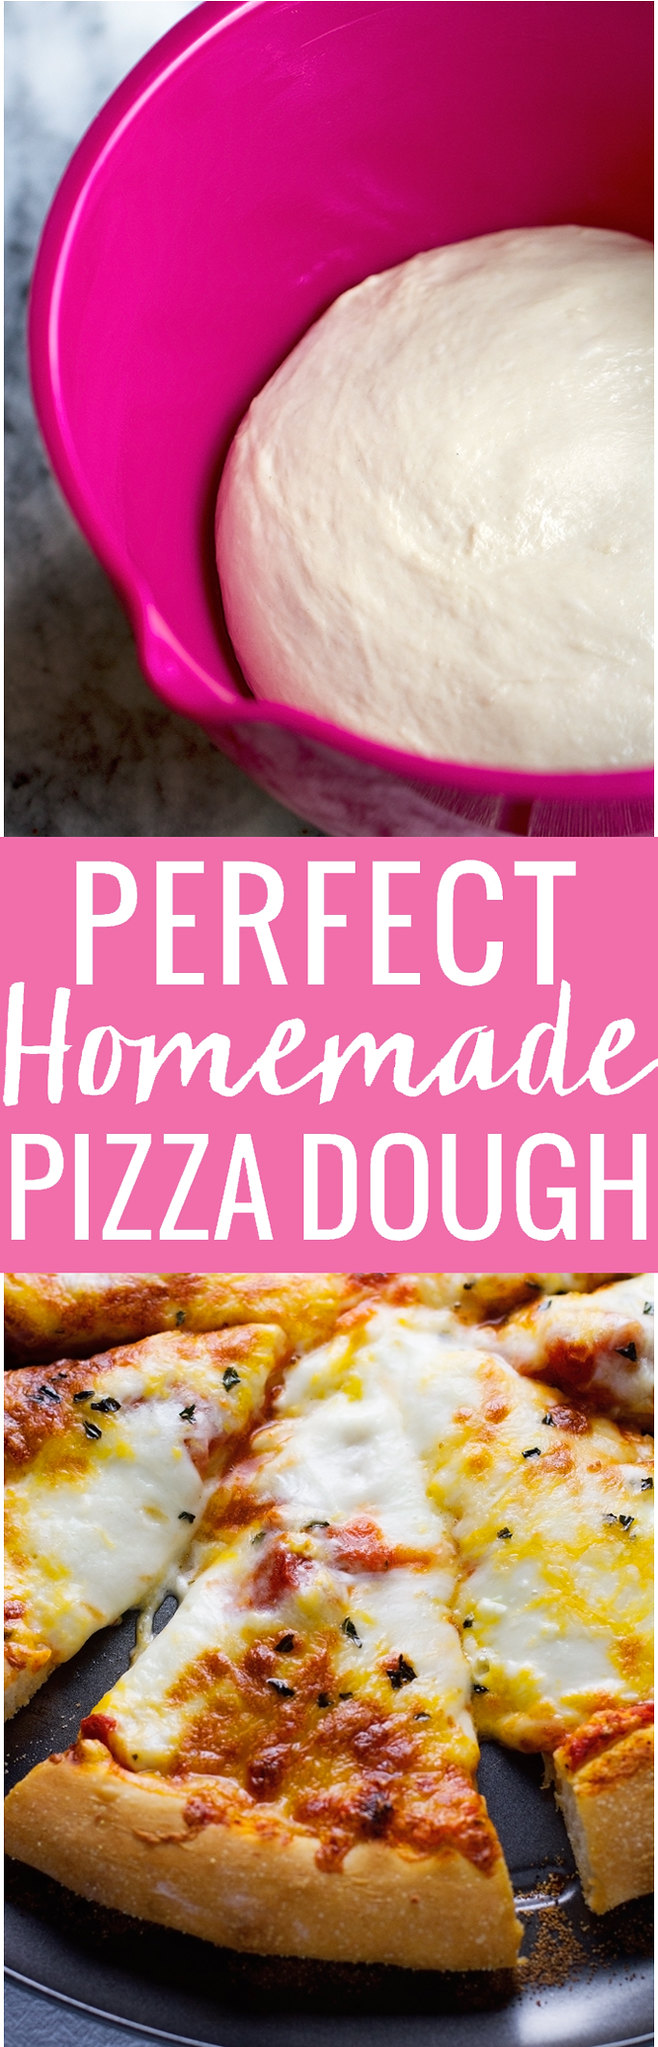 Perfect Homemade Pizza Dough - made with NO REFINED SUGARS and easy to follow with step-by-step directions! #homemadepizza #pizzadough #homemadepizzacrust | Littlespicejar.com